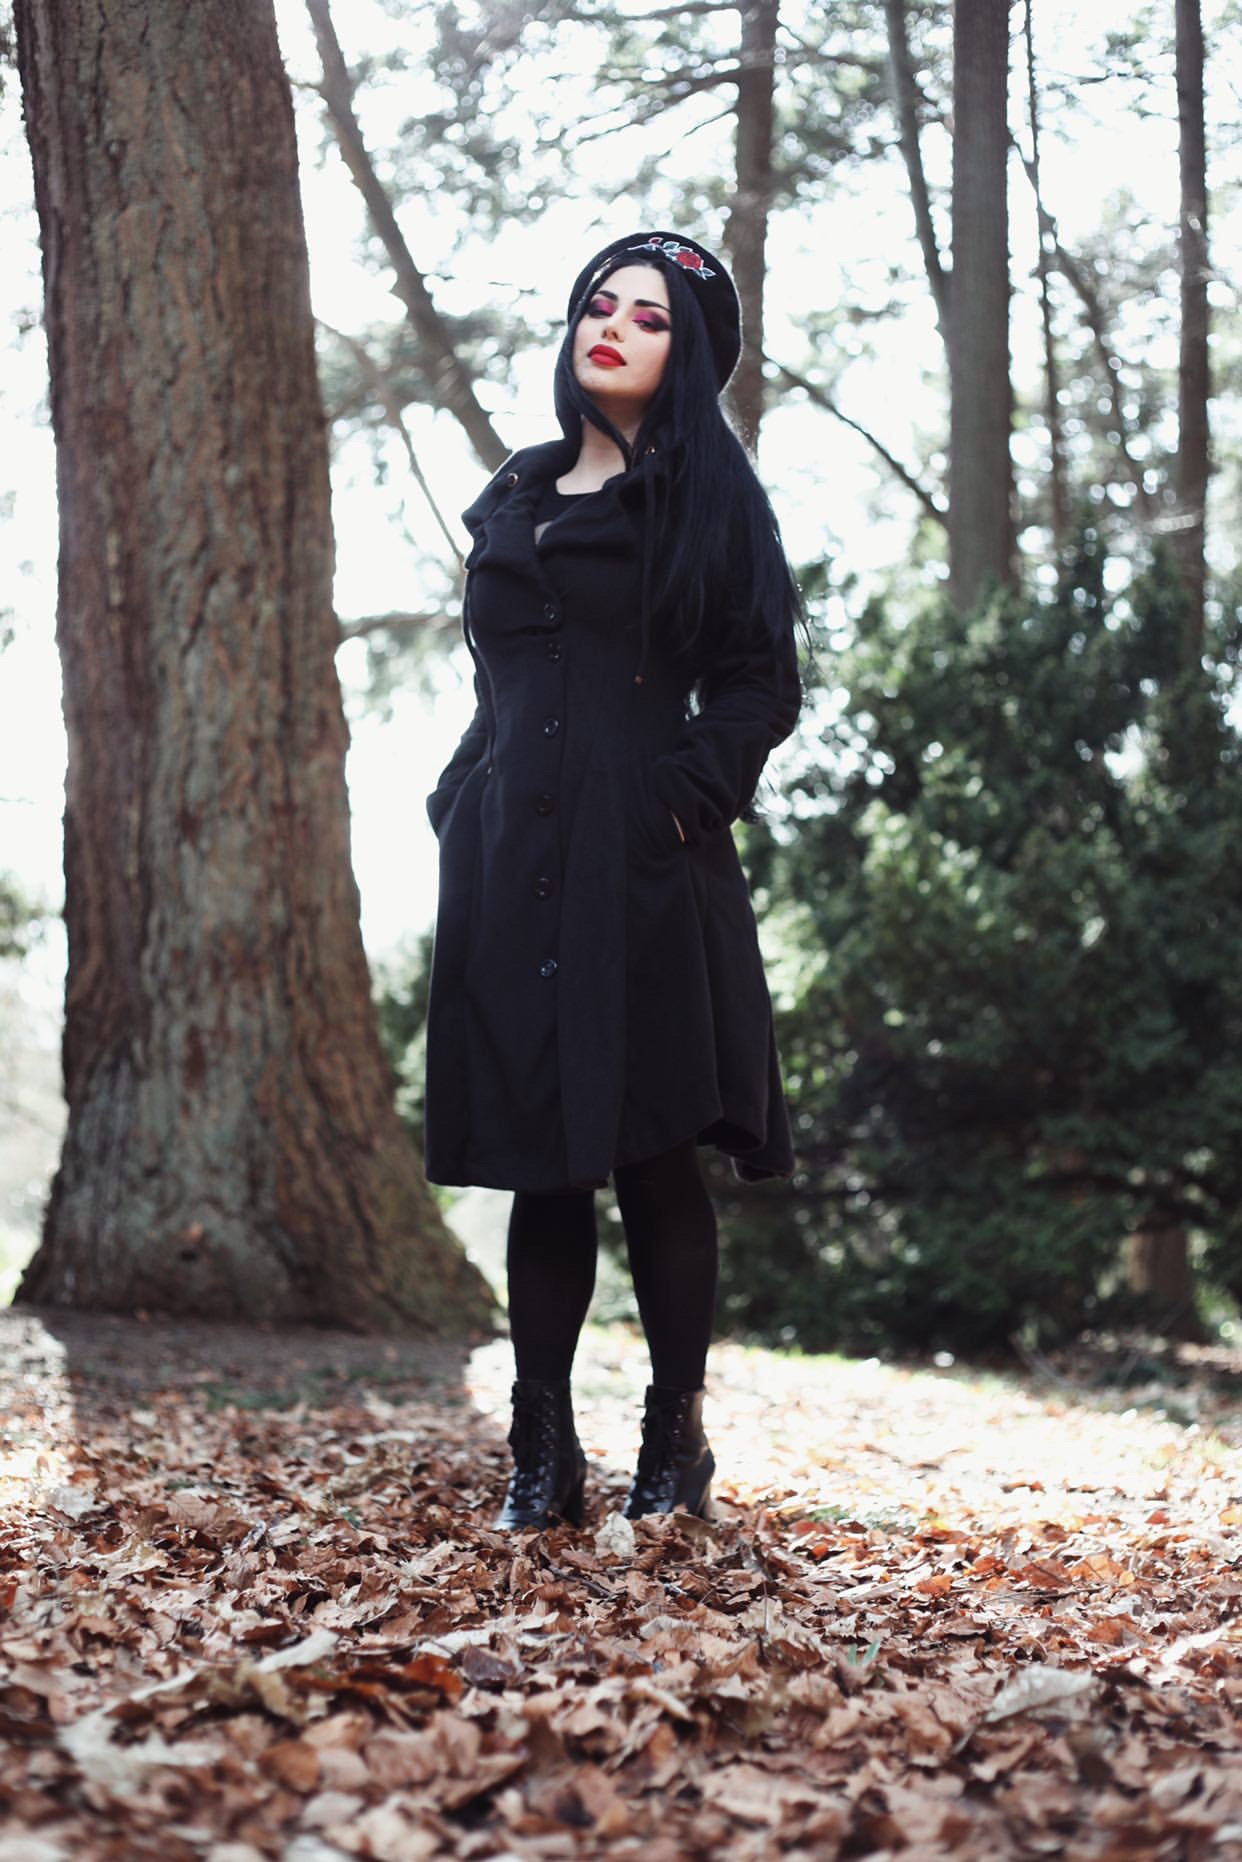 Gothic Trench Coat - Goth Mall